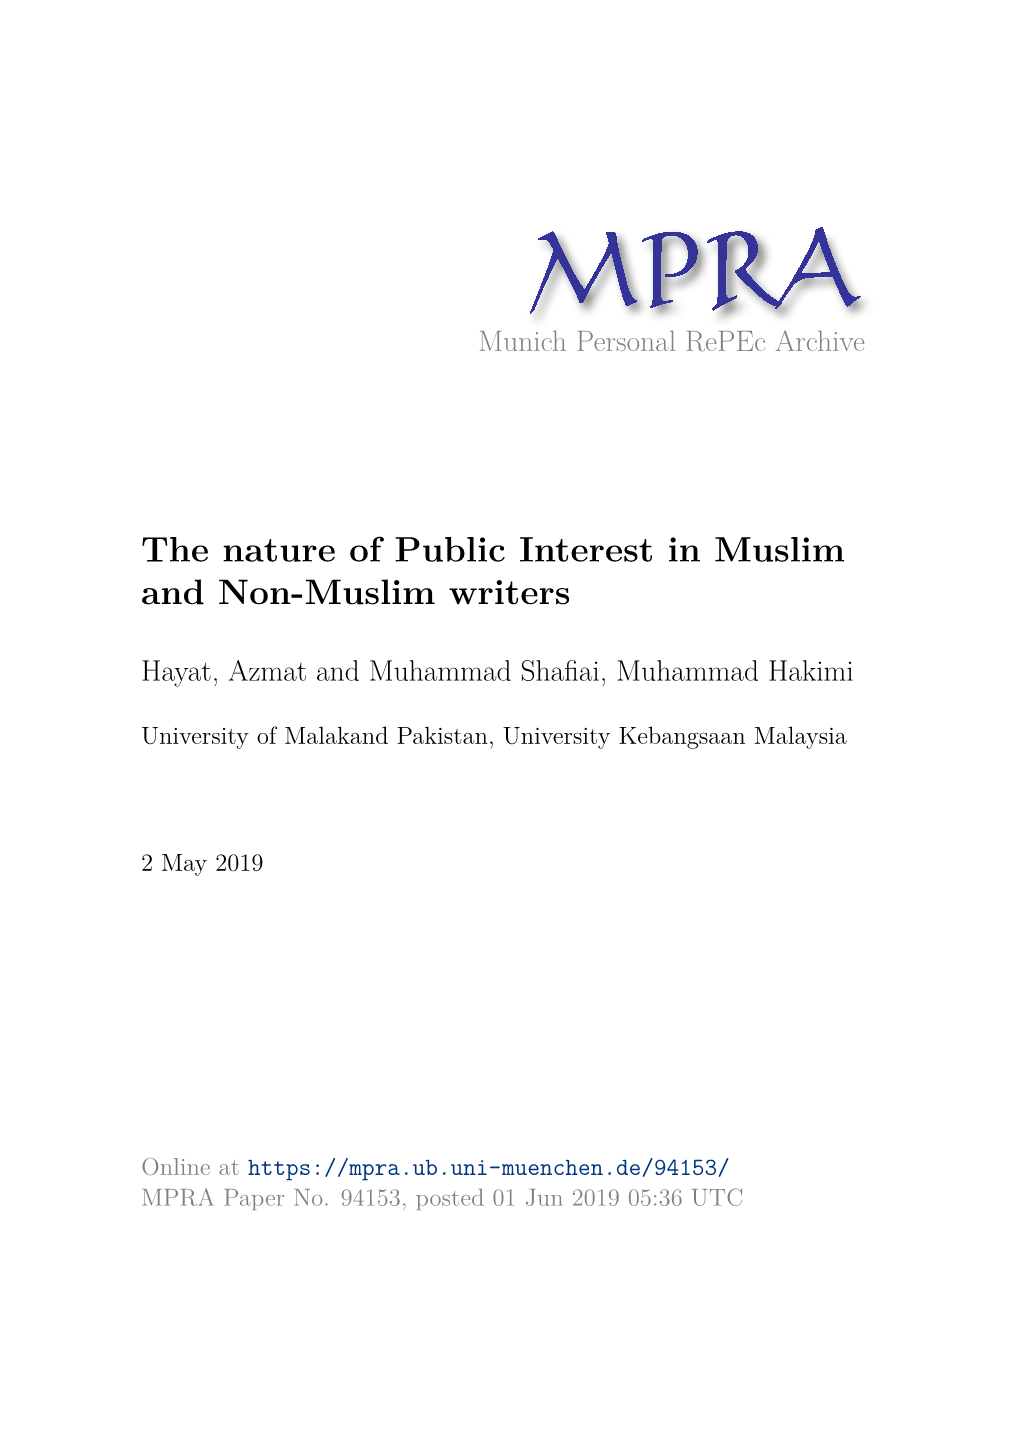 The Nature of Public Interest in Muslim and Non-Muslim Writers